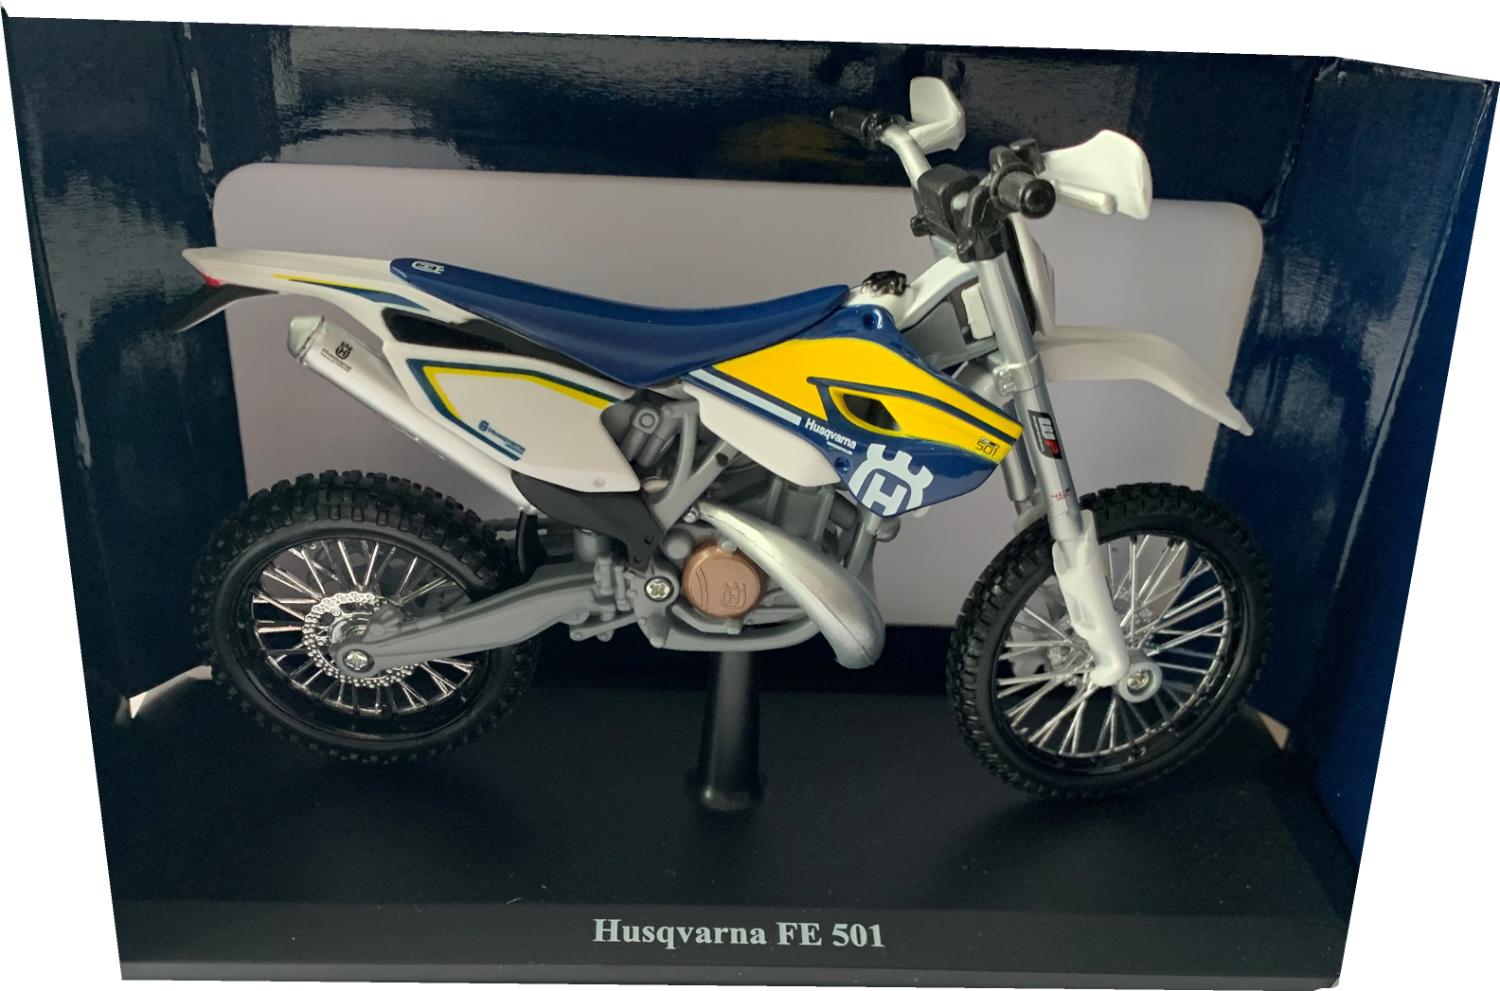 usqvarna FE 501 in white / blue / yellow 1:12 scale model from Maisto, mounted on a plinth in a Husqvarna themed box